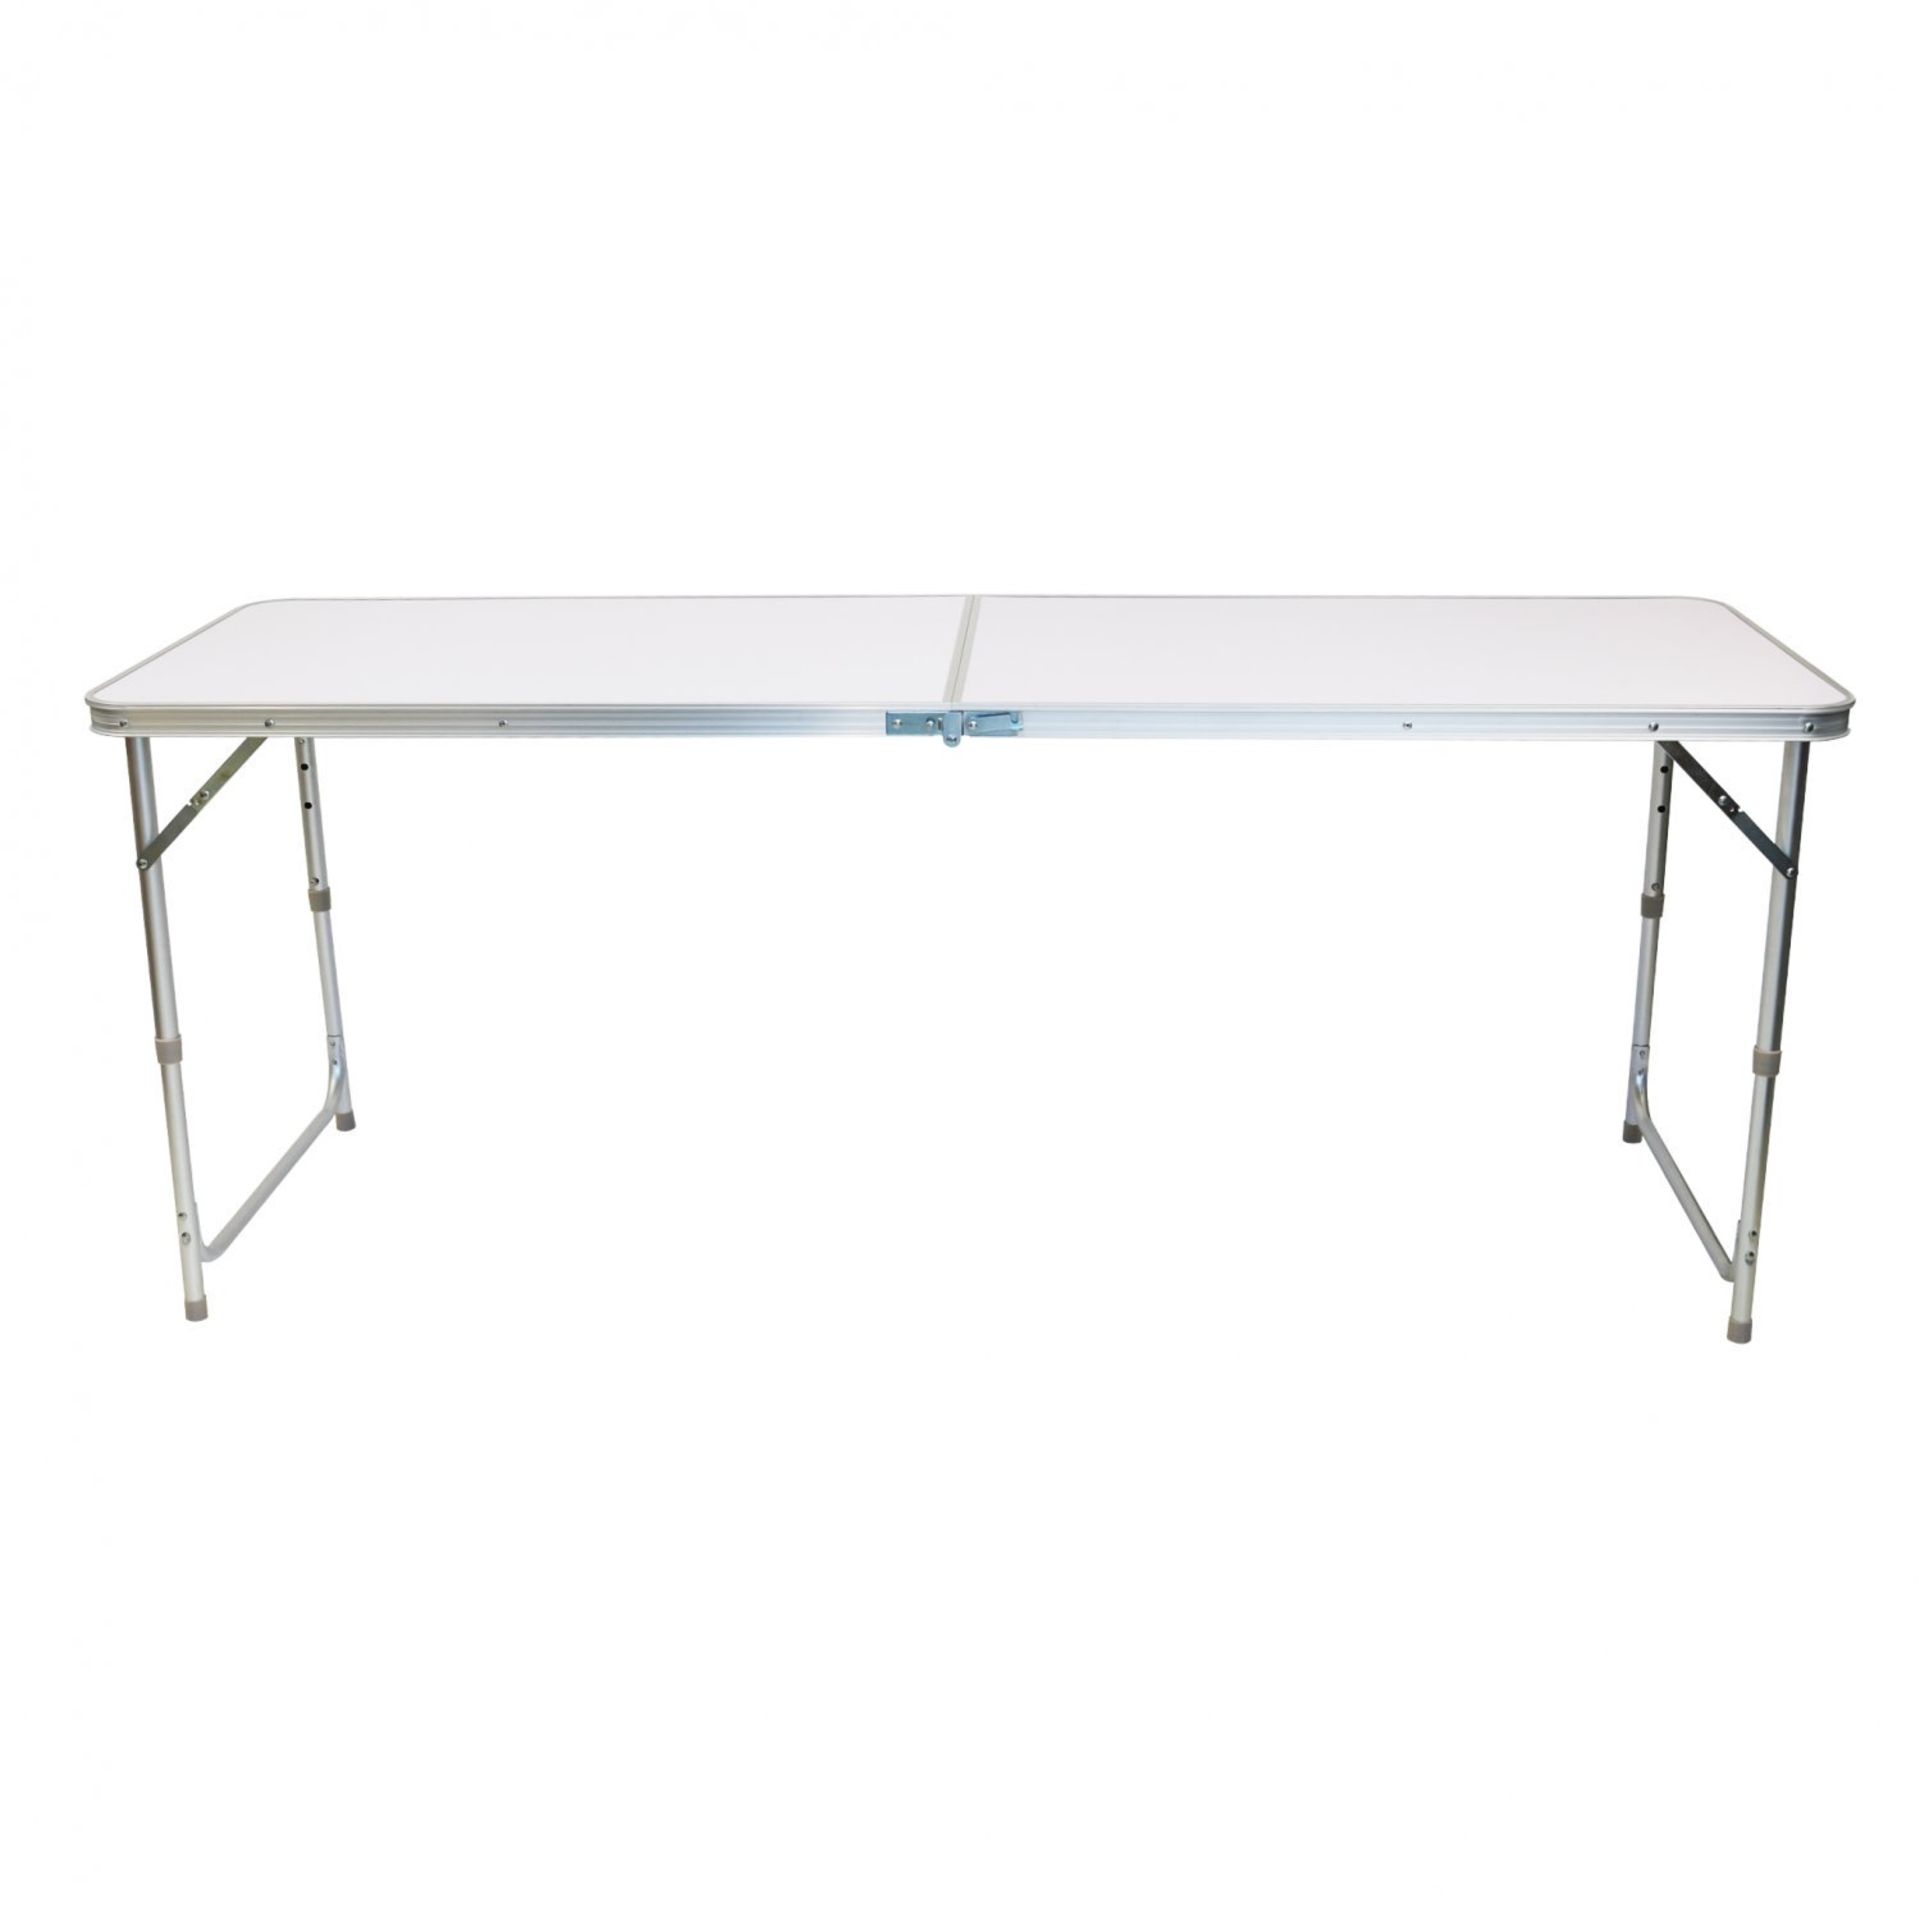 (PP527) 4ft Folding Outdoor Camping Kitchen Work Top Table The aluminium folding picnic tabl... - Image 2 of 2